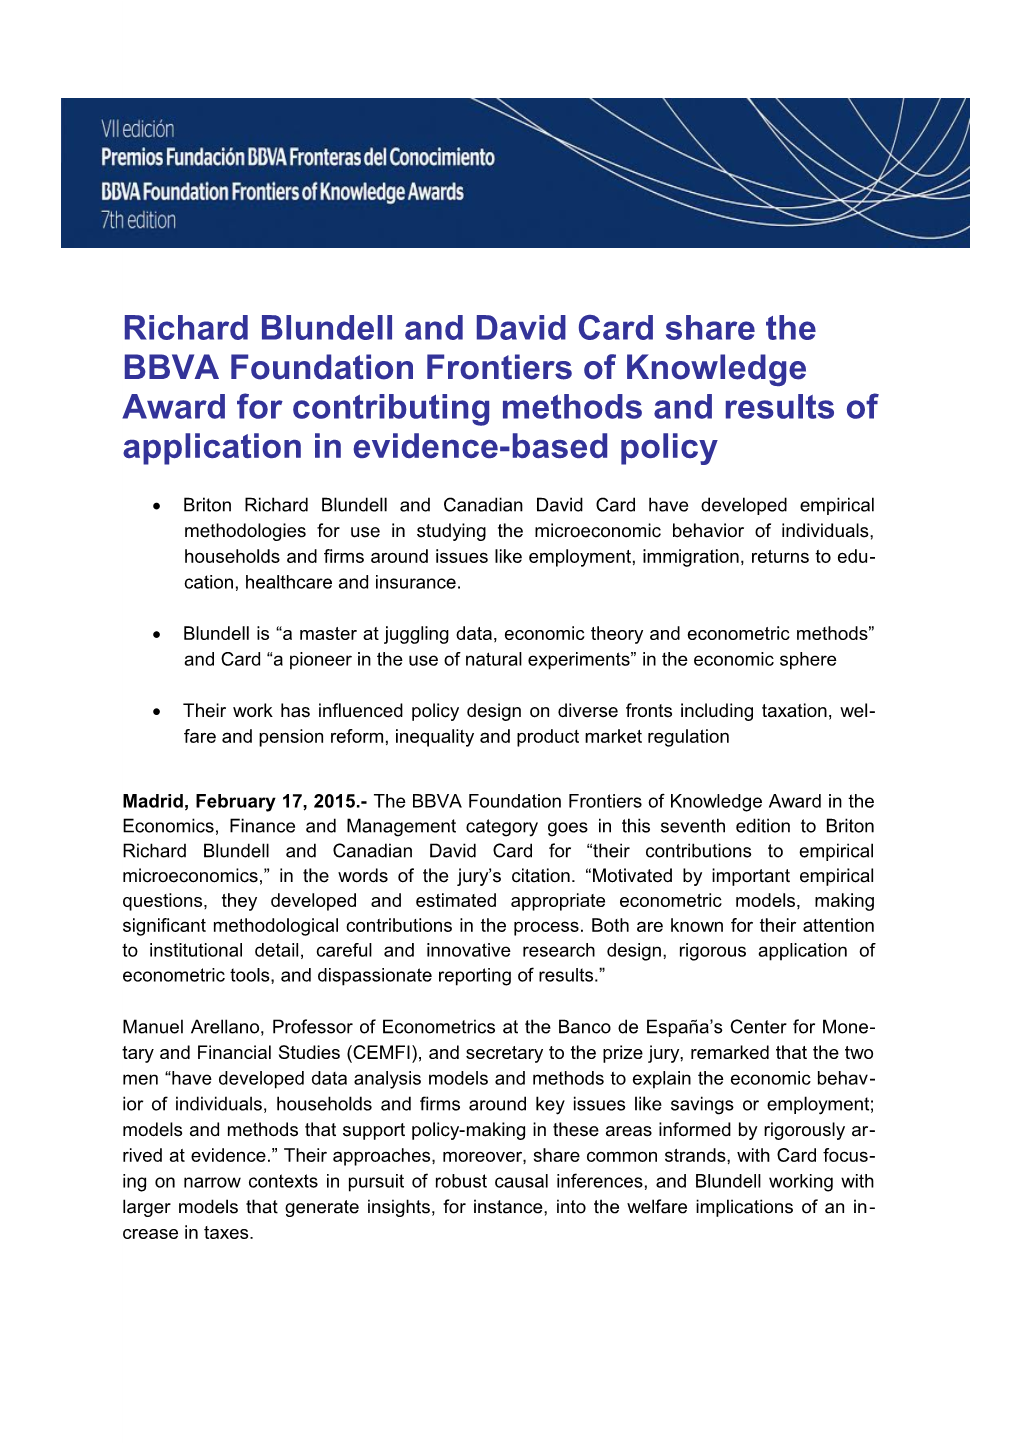 Richard Blundell and David Card Share the BBVA Foundation Frontiers of Knowledge Award